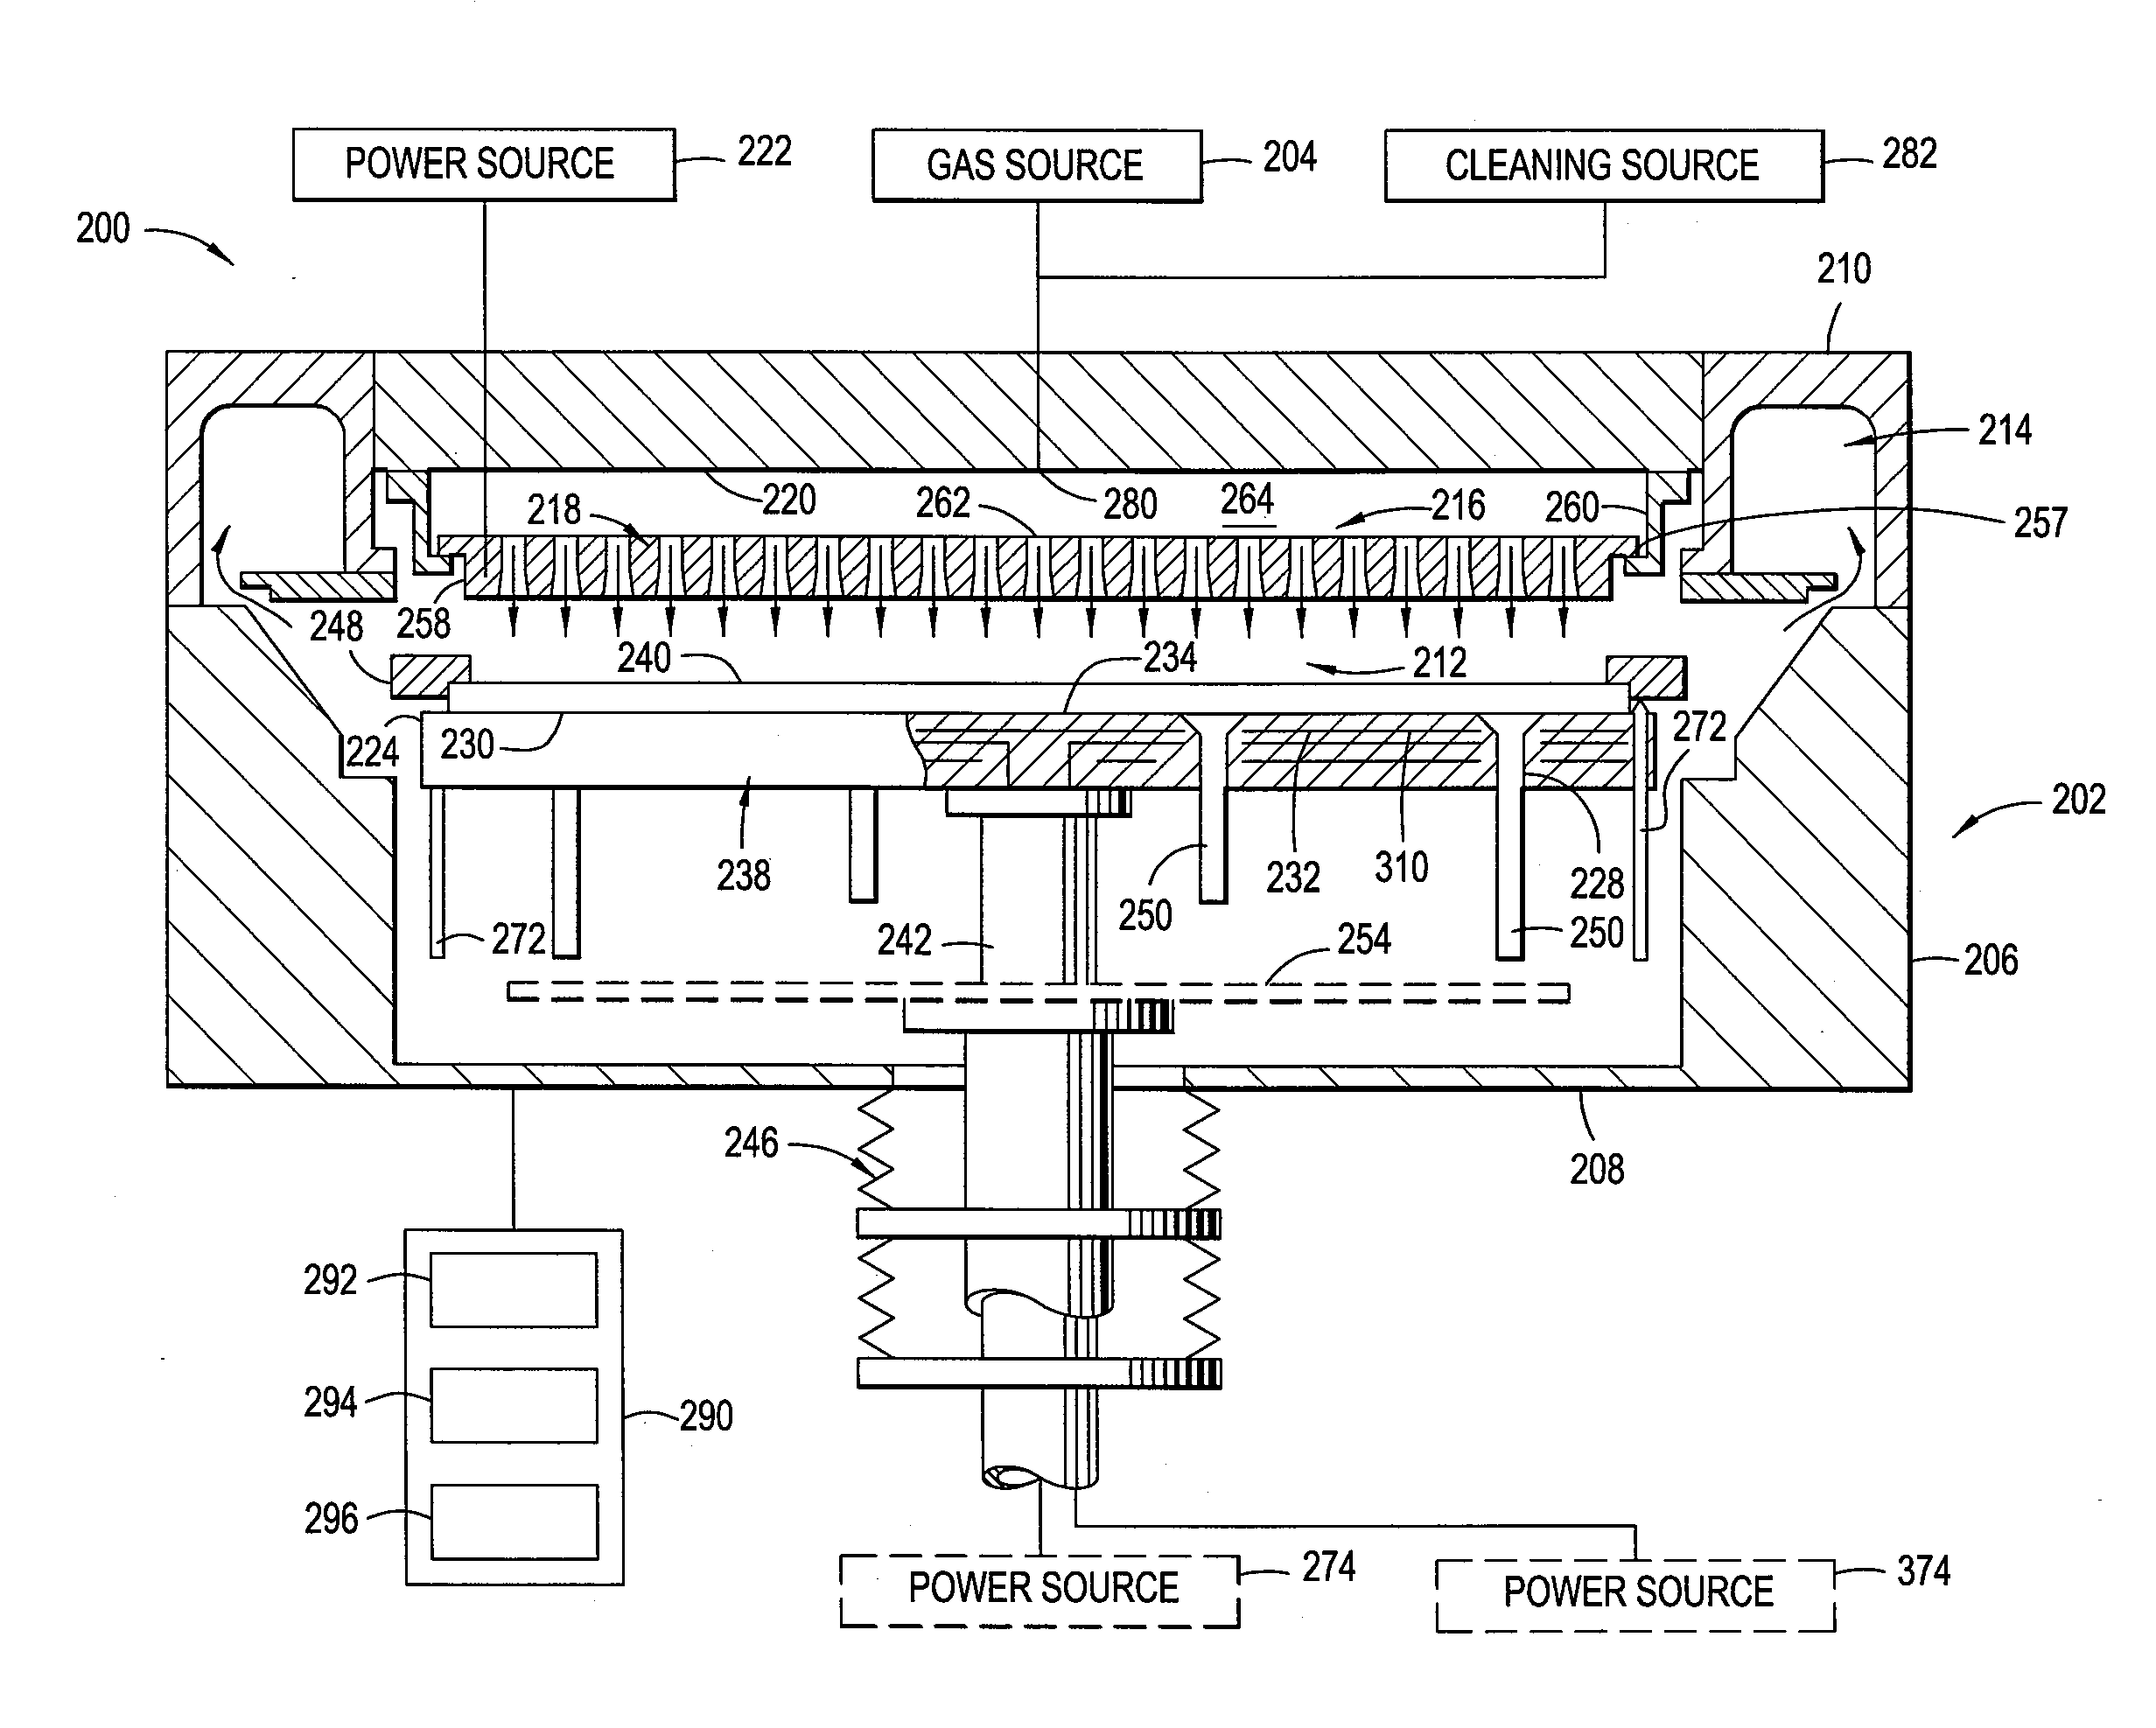 Heating and cooling of substrate support